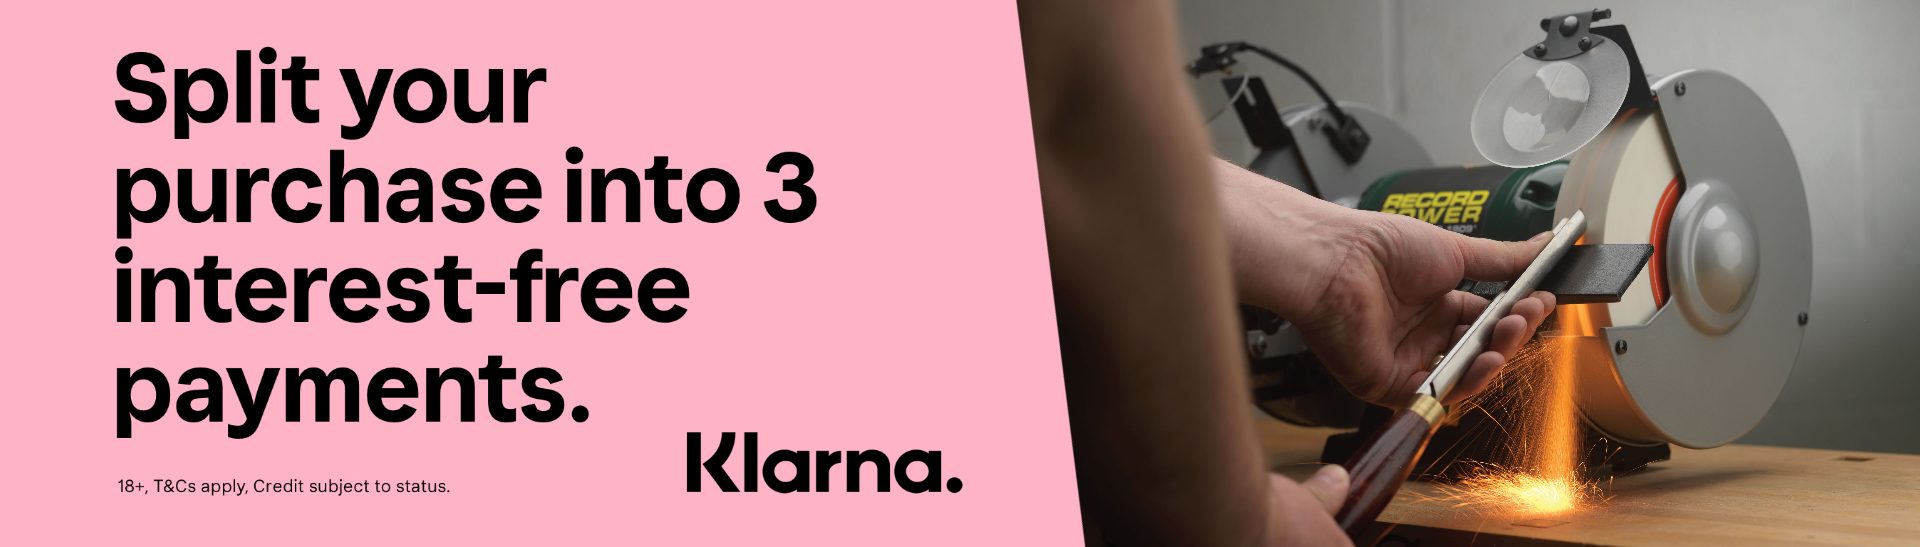 Split your purchase into 3 interest-free payments with Klarna